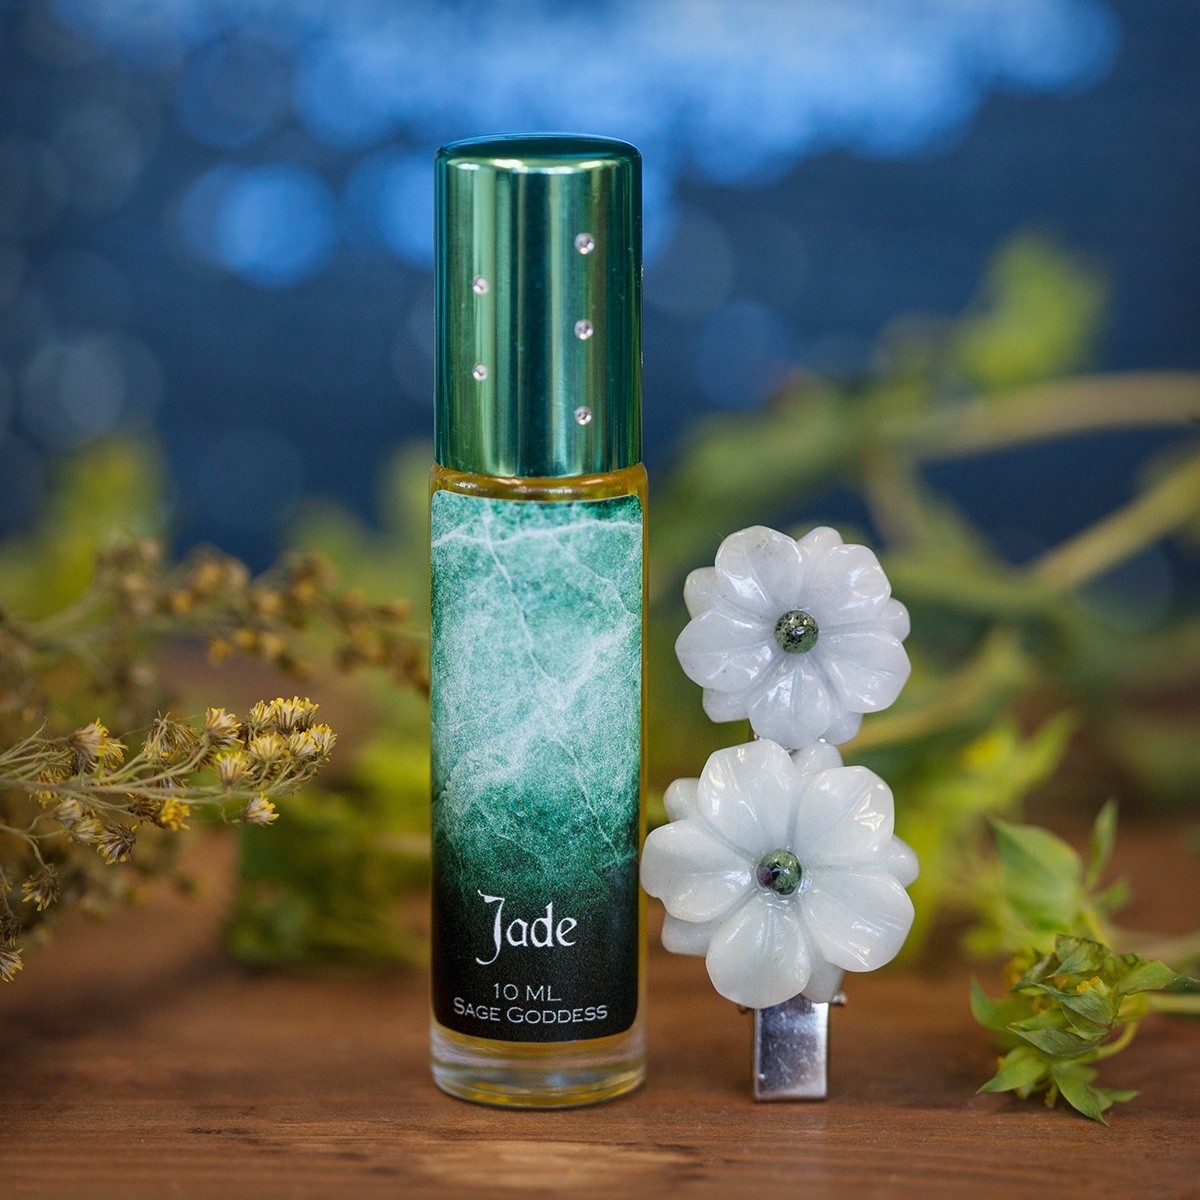 Jade Perfume with Jade Flower Clip 6_10 feature